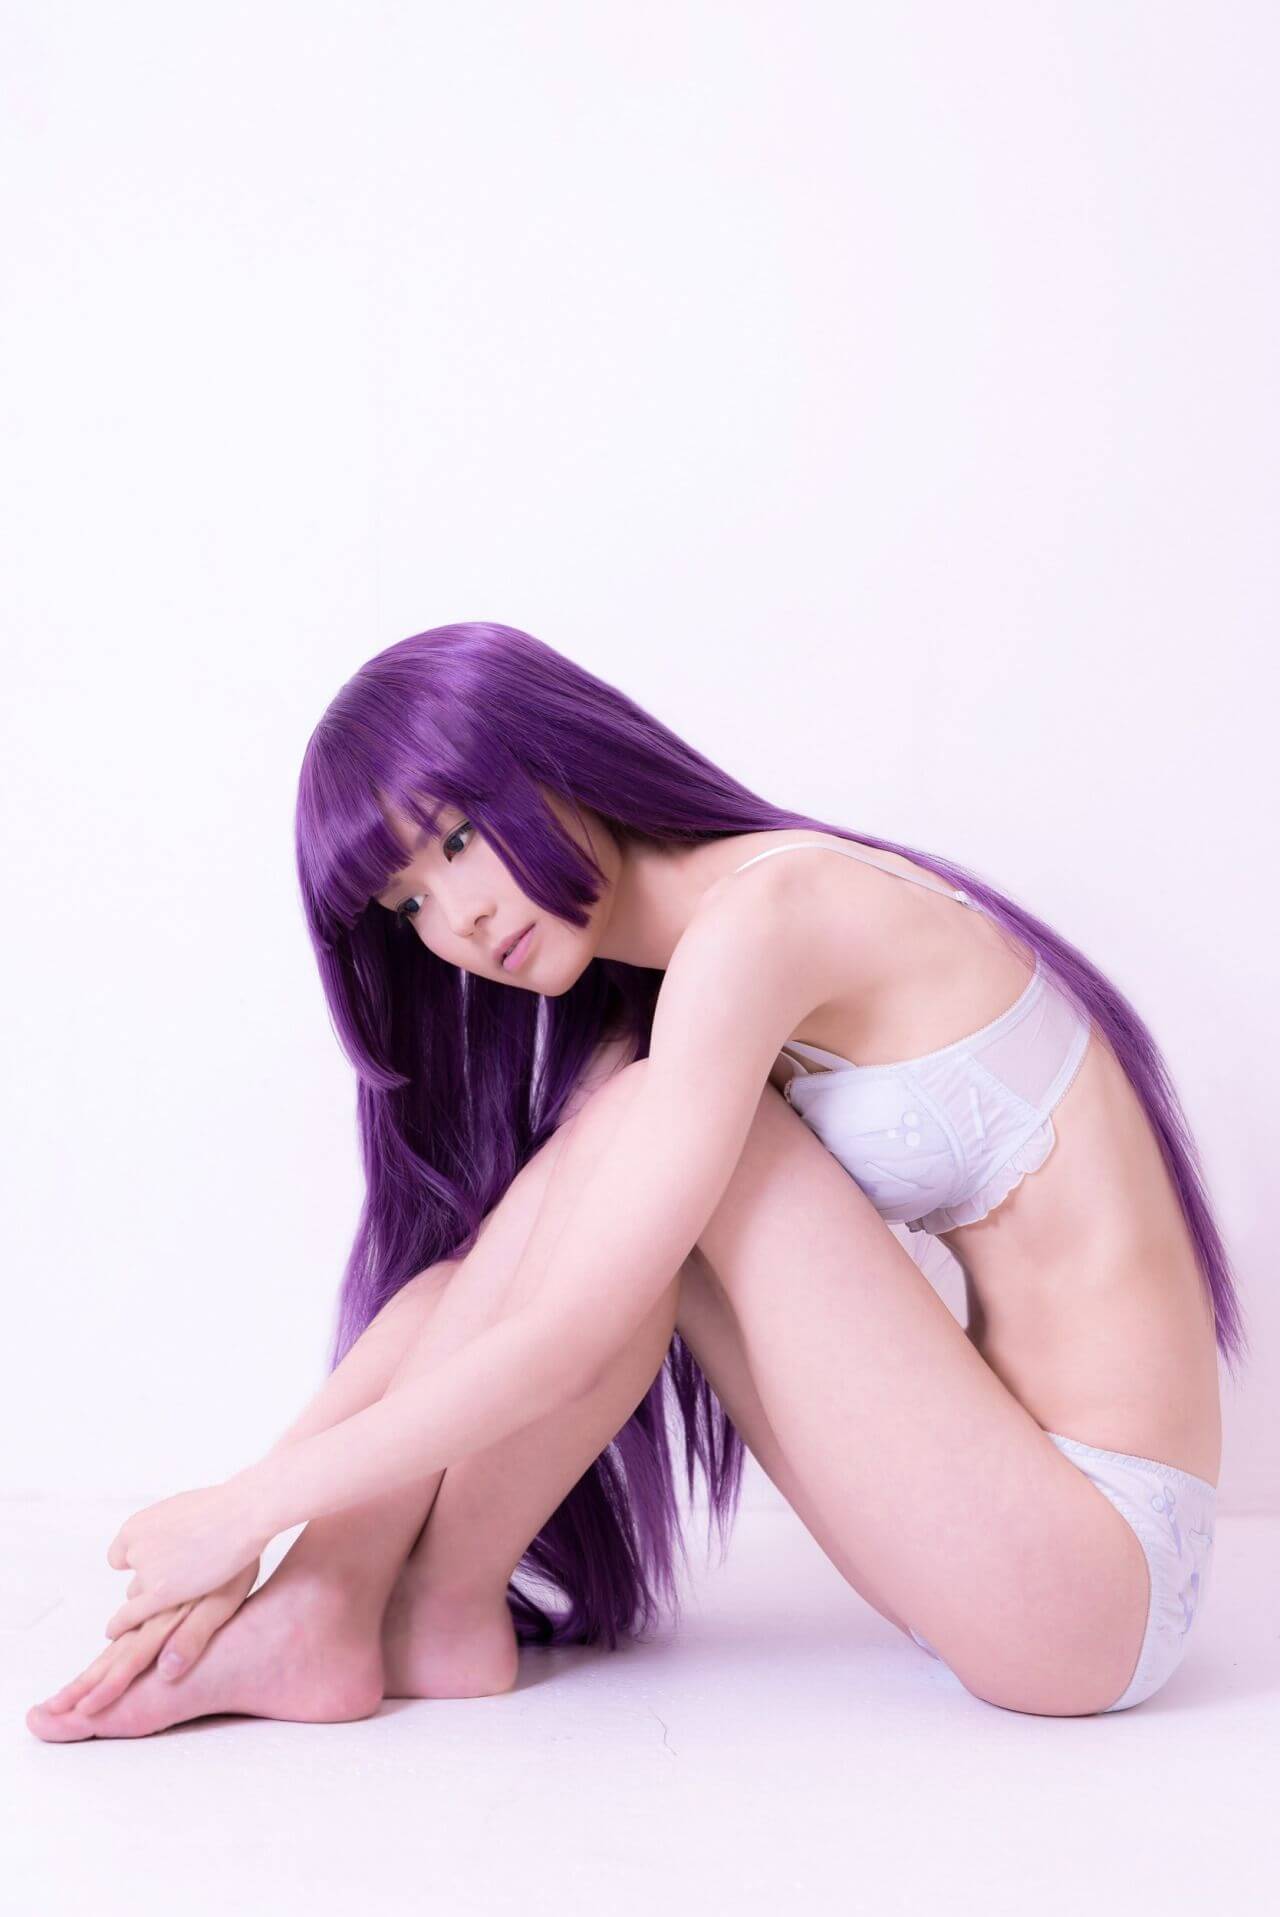 49 Hitagi Senjougahara Nude Pictures Will Put You In A Good Mood 24